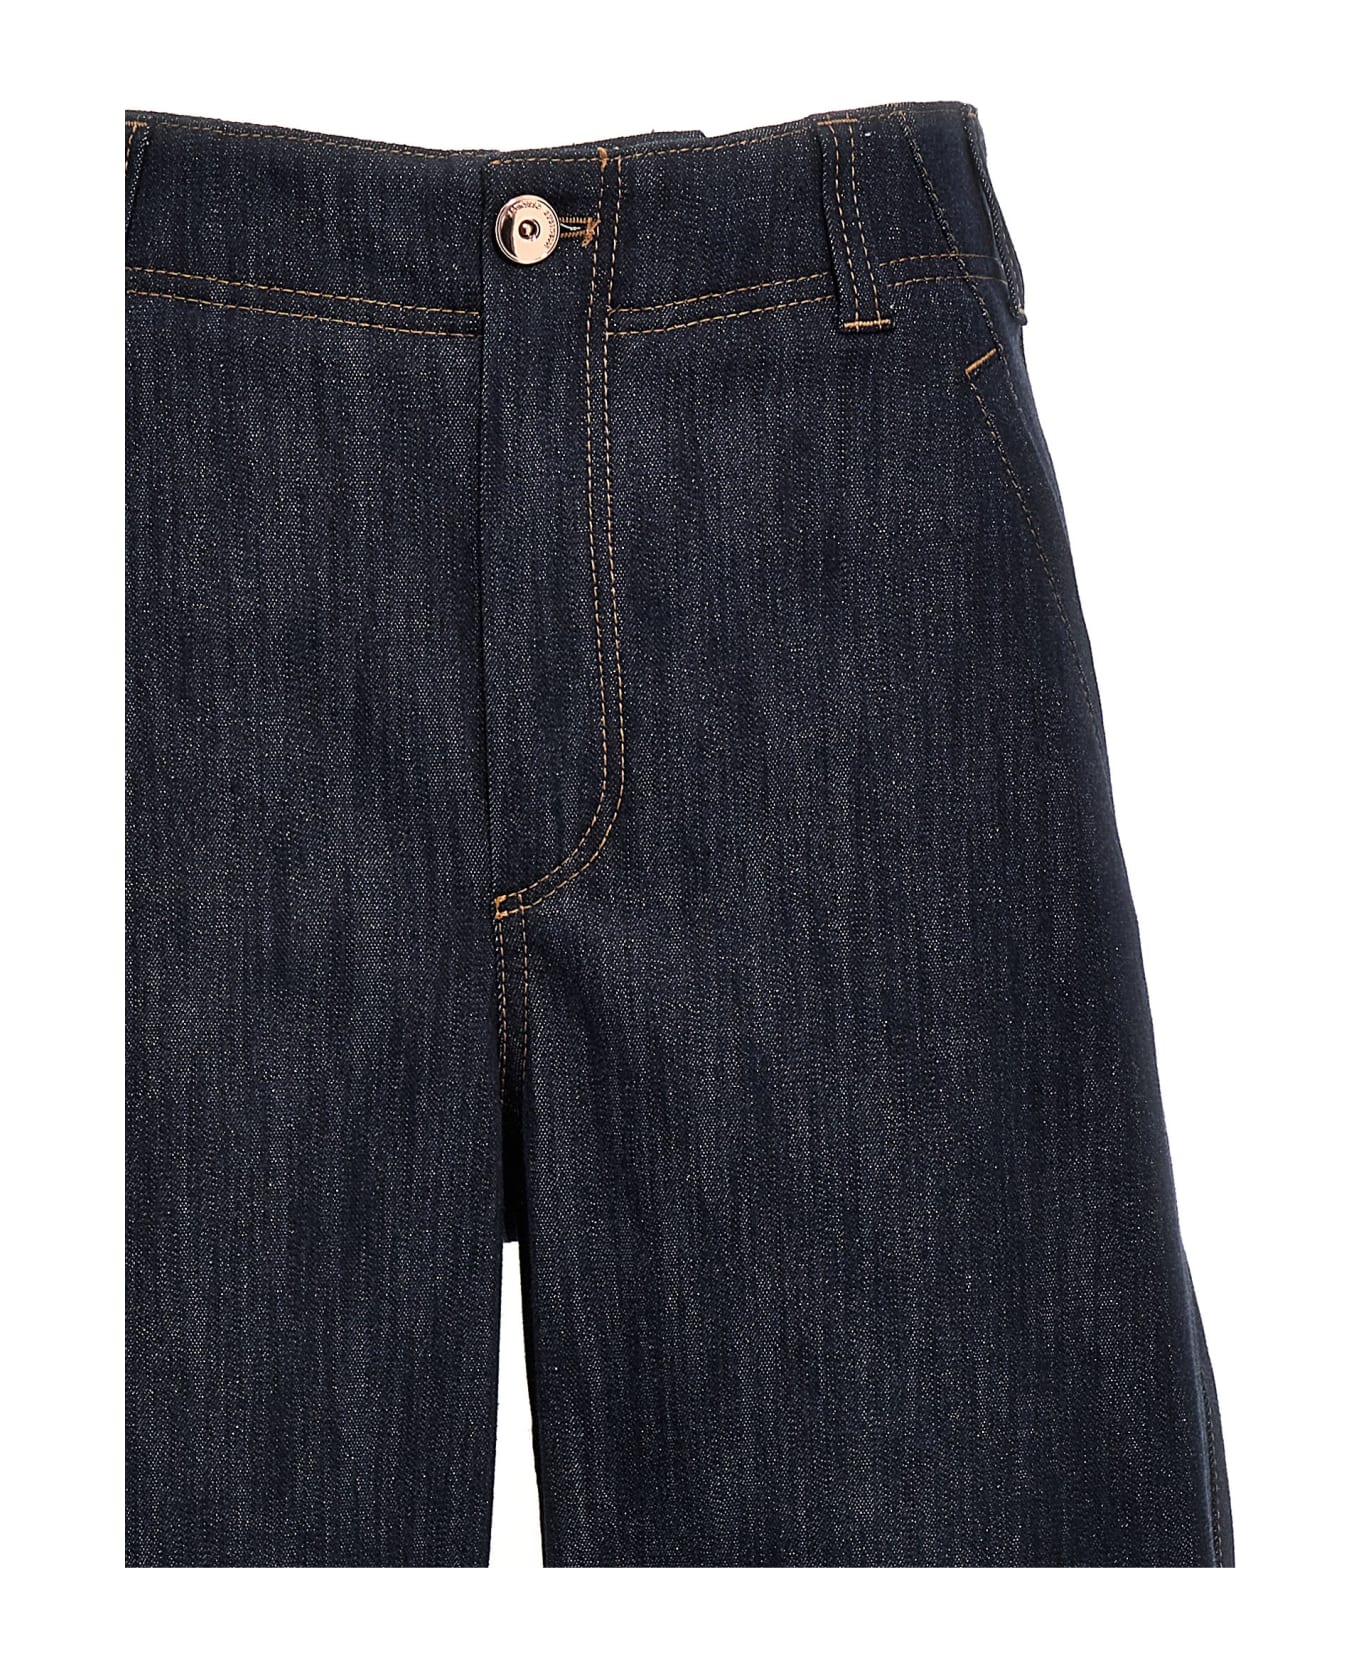 Brunello Cucinelli 'curved' Jeans - Blue デニム